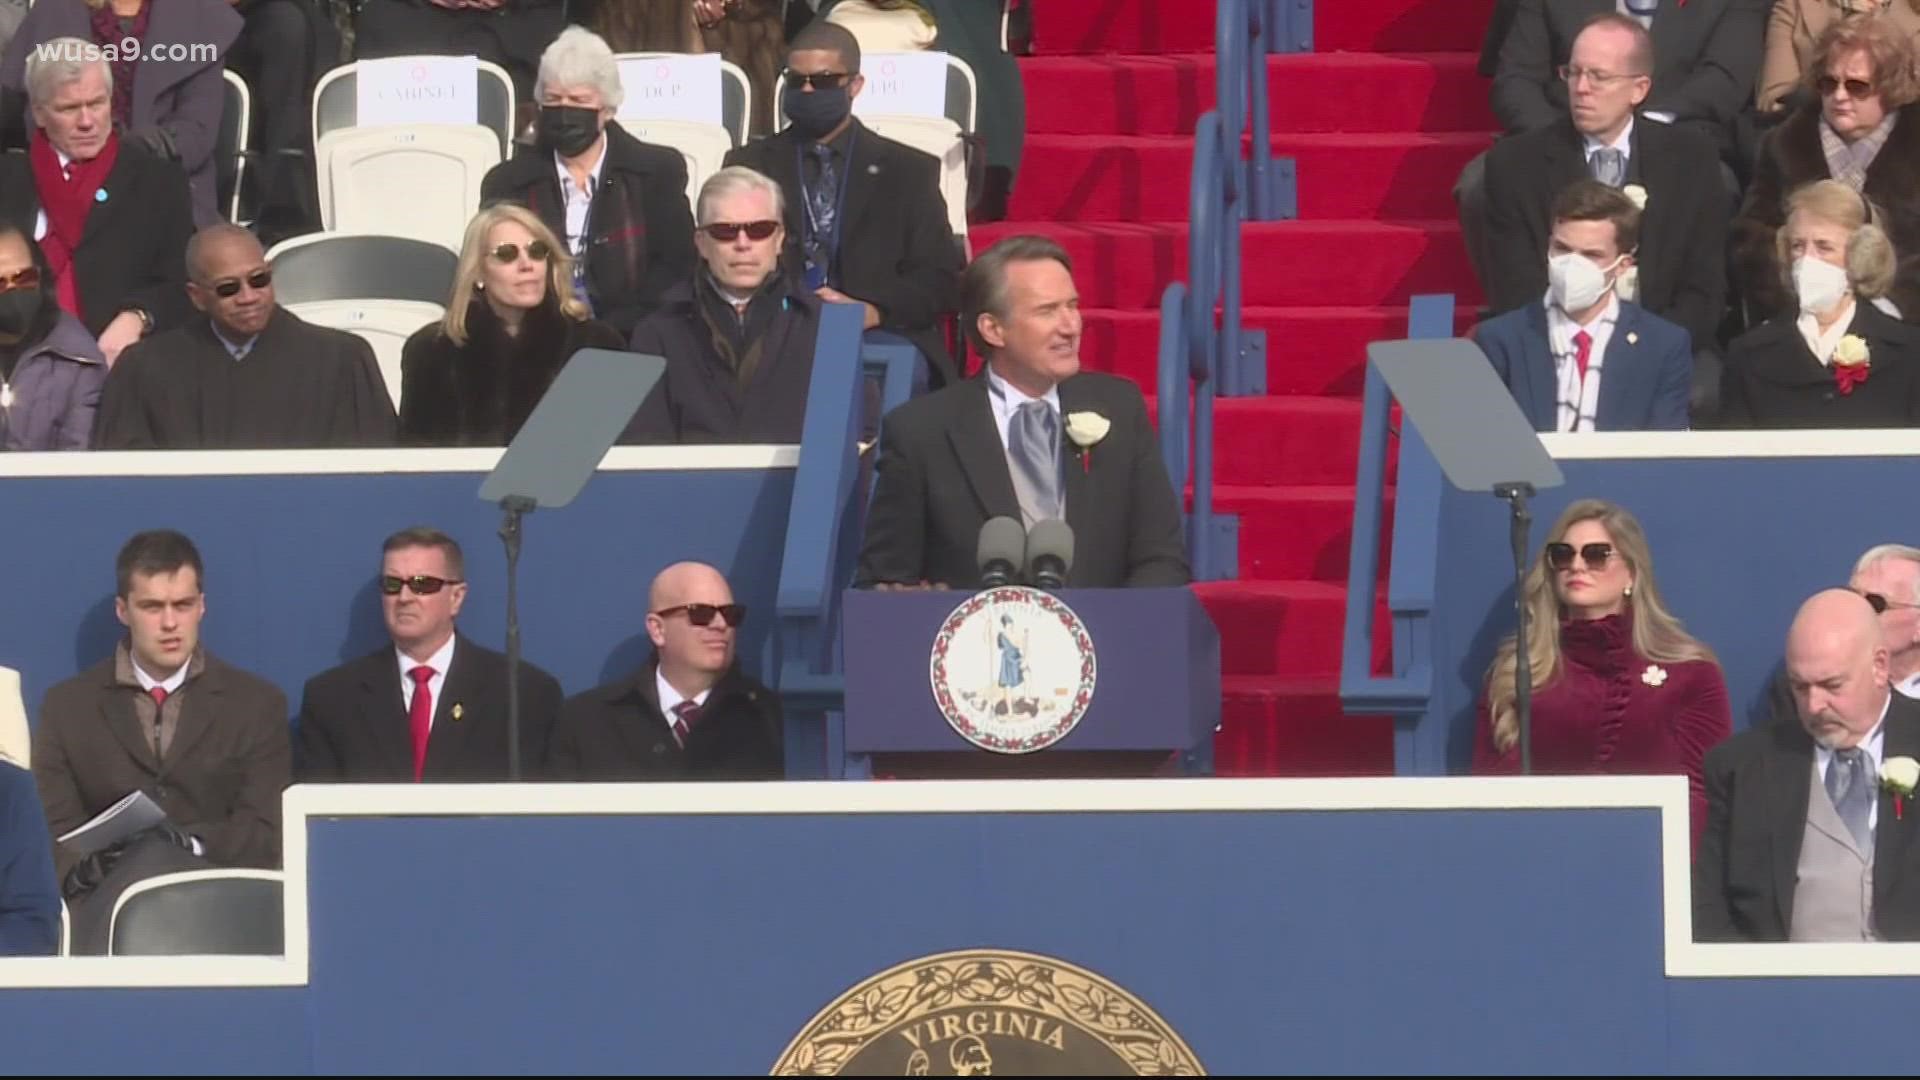 Thousands gathered in Richmond to watch a new Republican take the oath of office to lead the commonwealth.